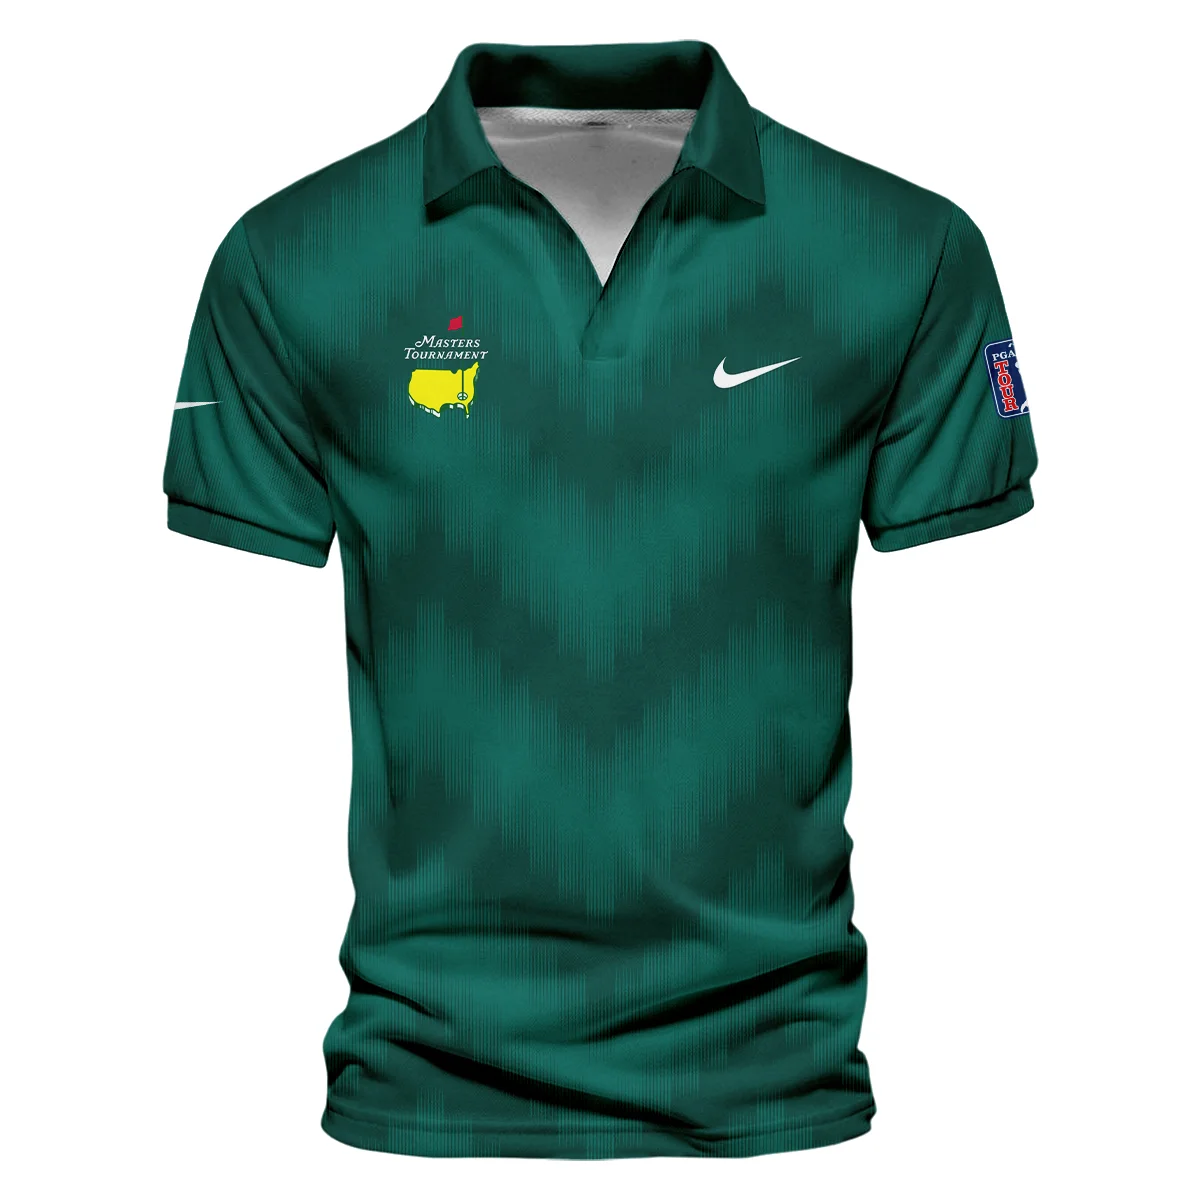 Golf Sport Green Gradient Stripes Pattern Nike Masters Tournament Vneck Polo Shirt Style Classic Polo Shirt For Men